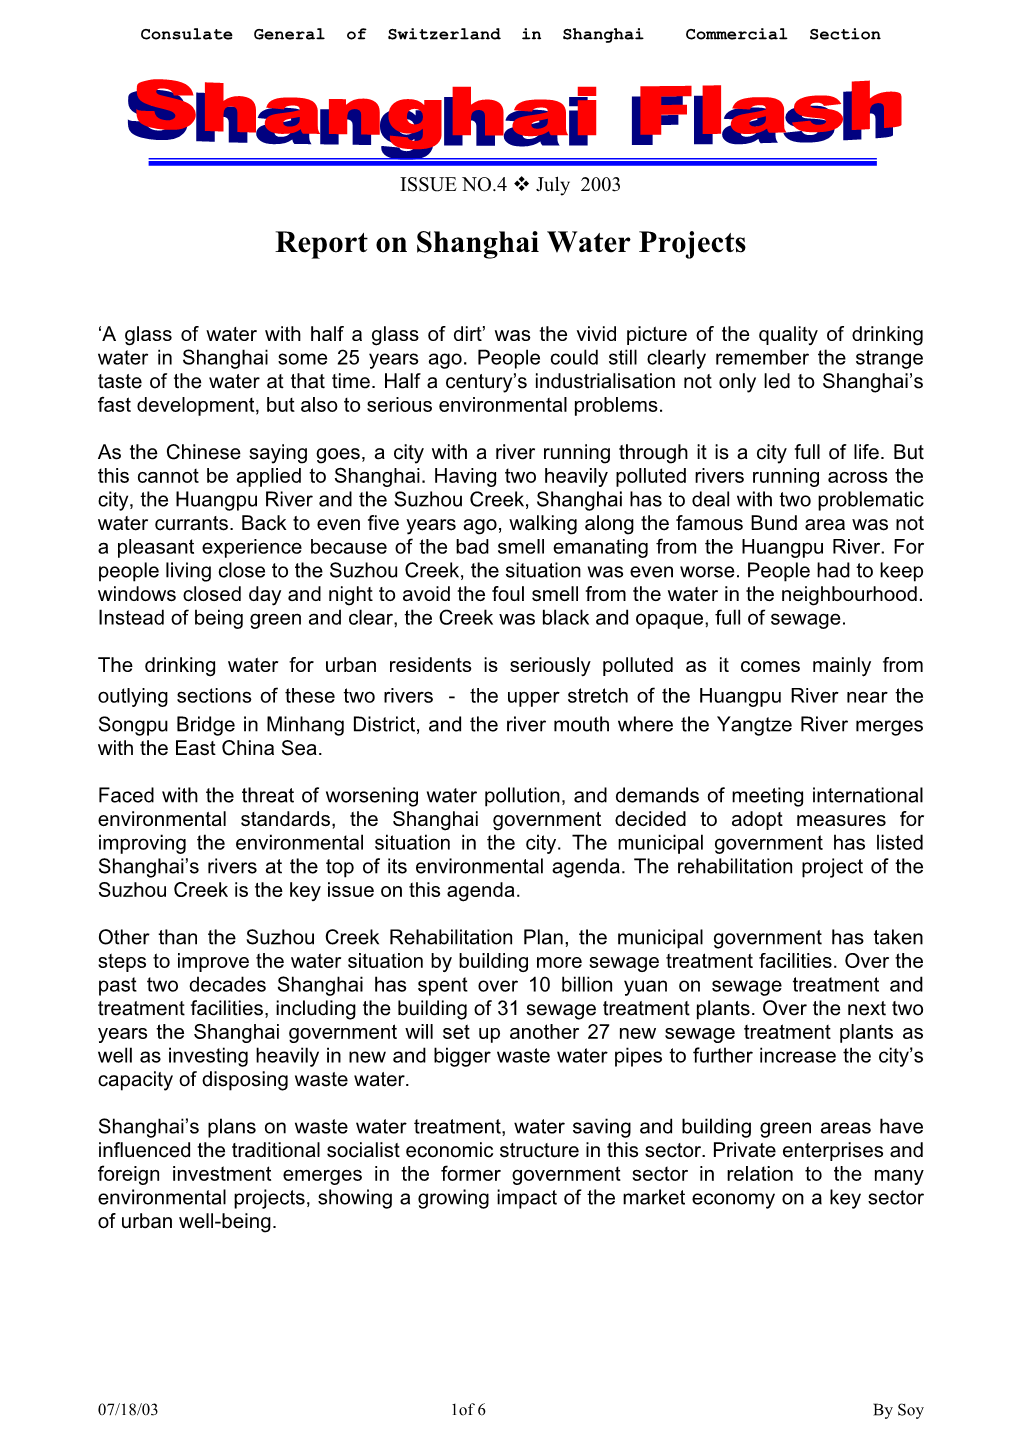 Report on Shanghai Water Projects